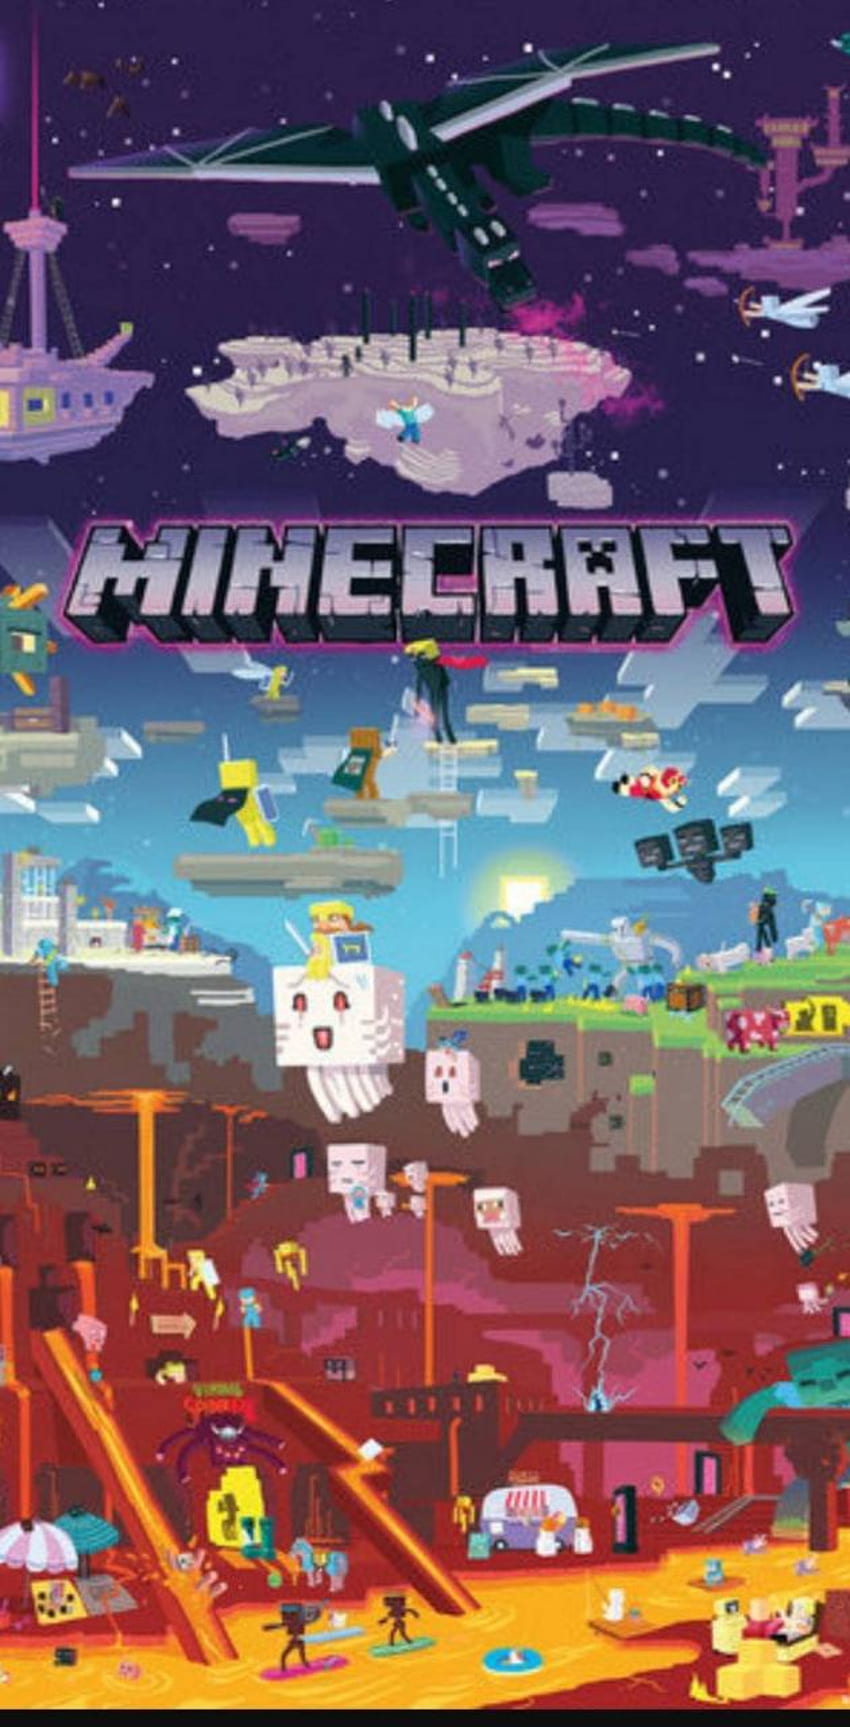 cool minecraft poster